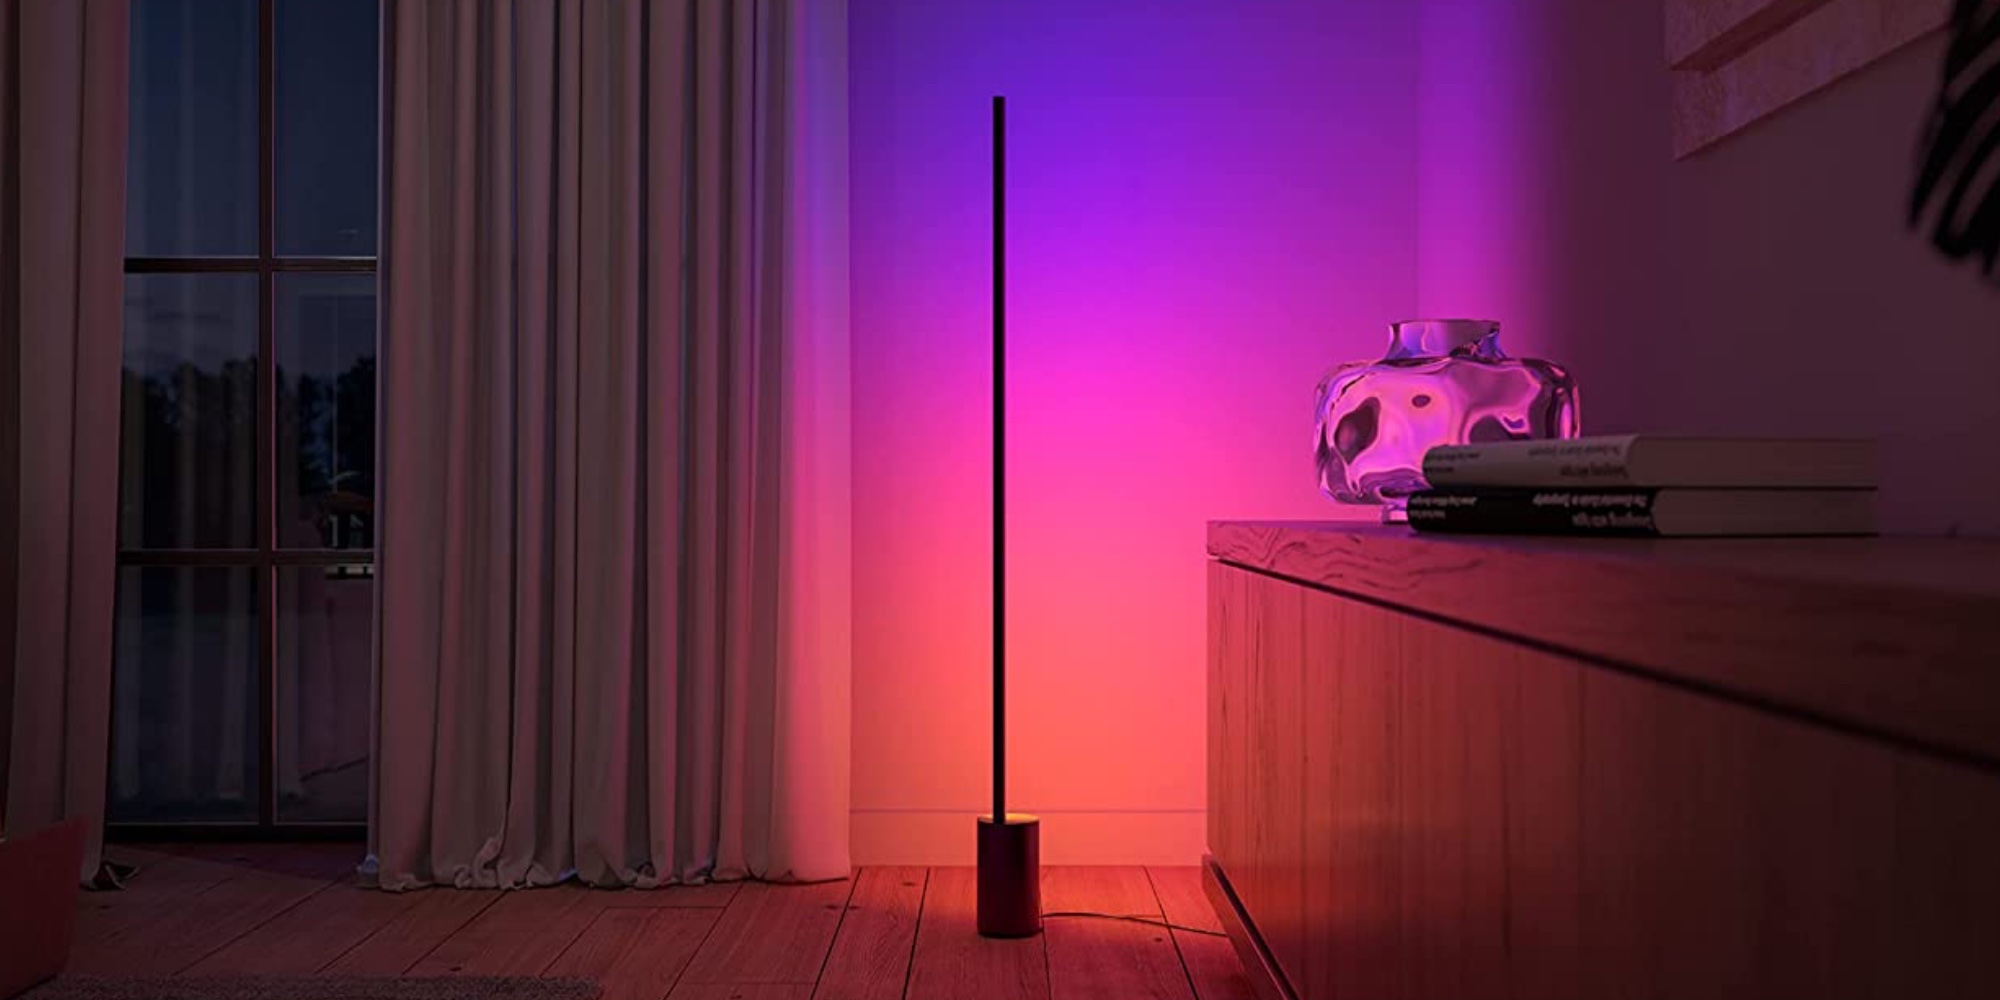 More Gradient Lighting From Hue Revealed - Homekit News and Reviews